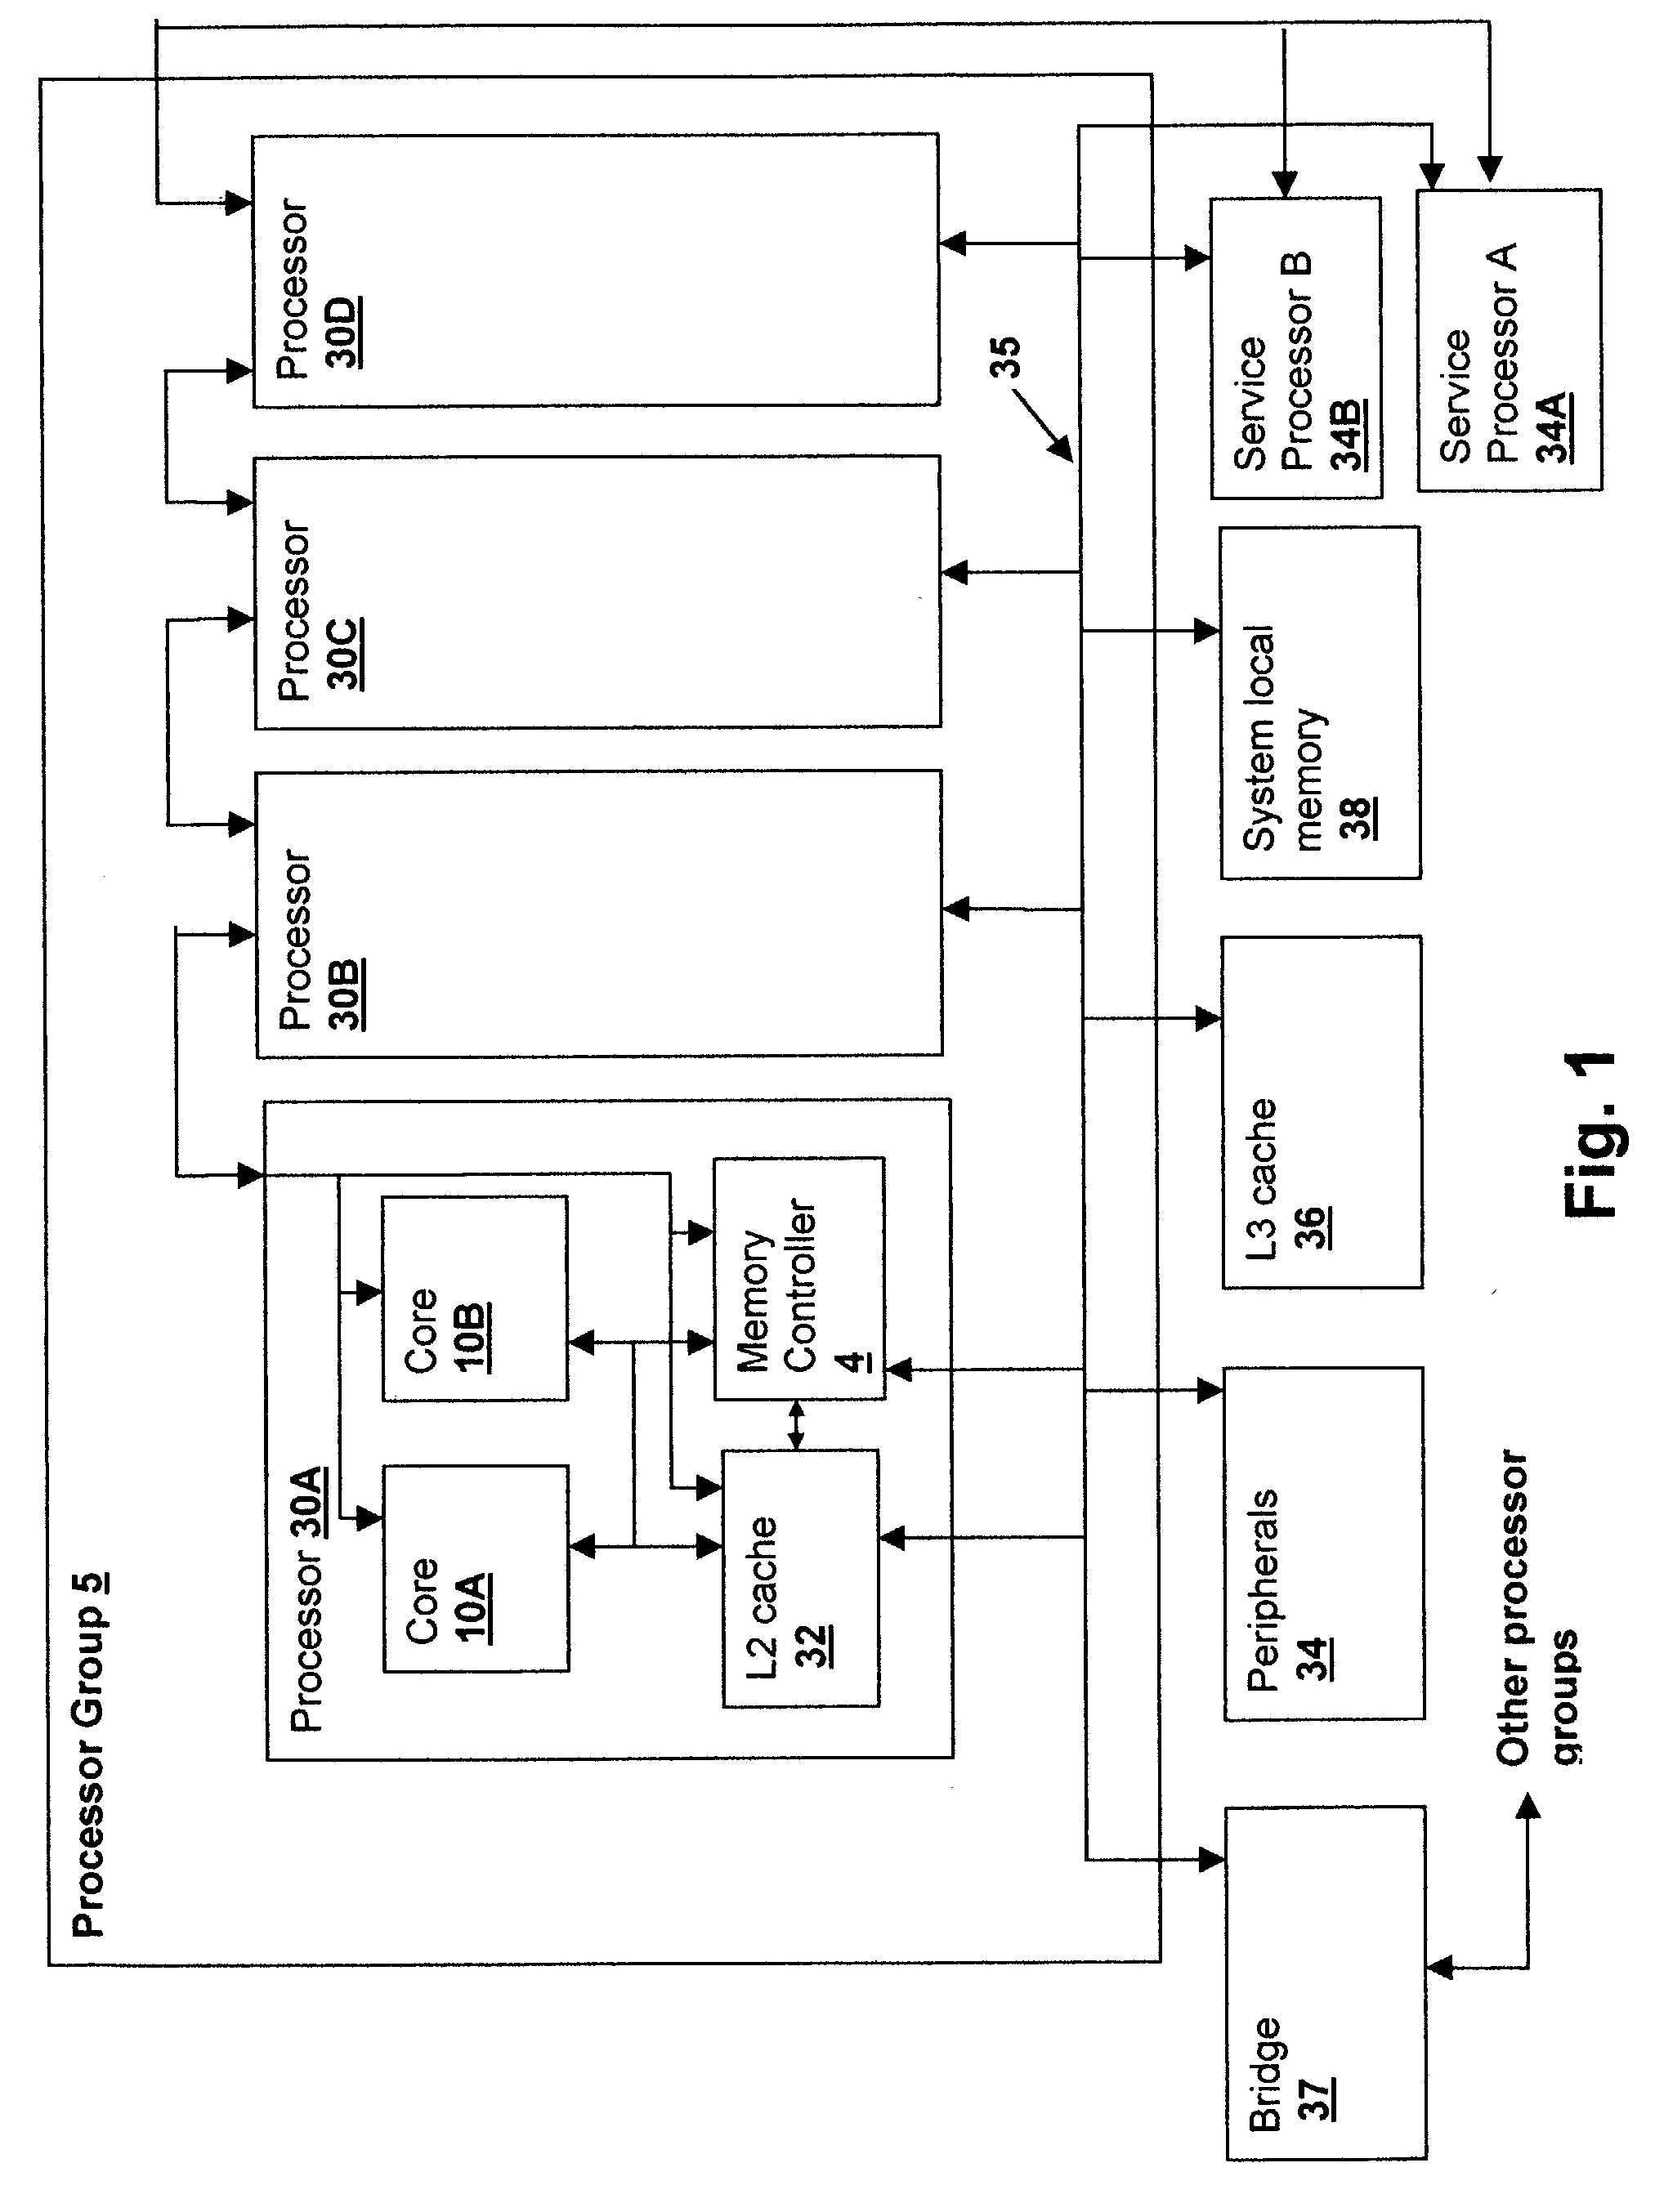 Accounting method and logic for determining per-thread processor resource utilization in a simultaneous multi-threaded (SMT) processor